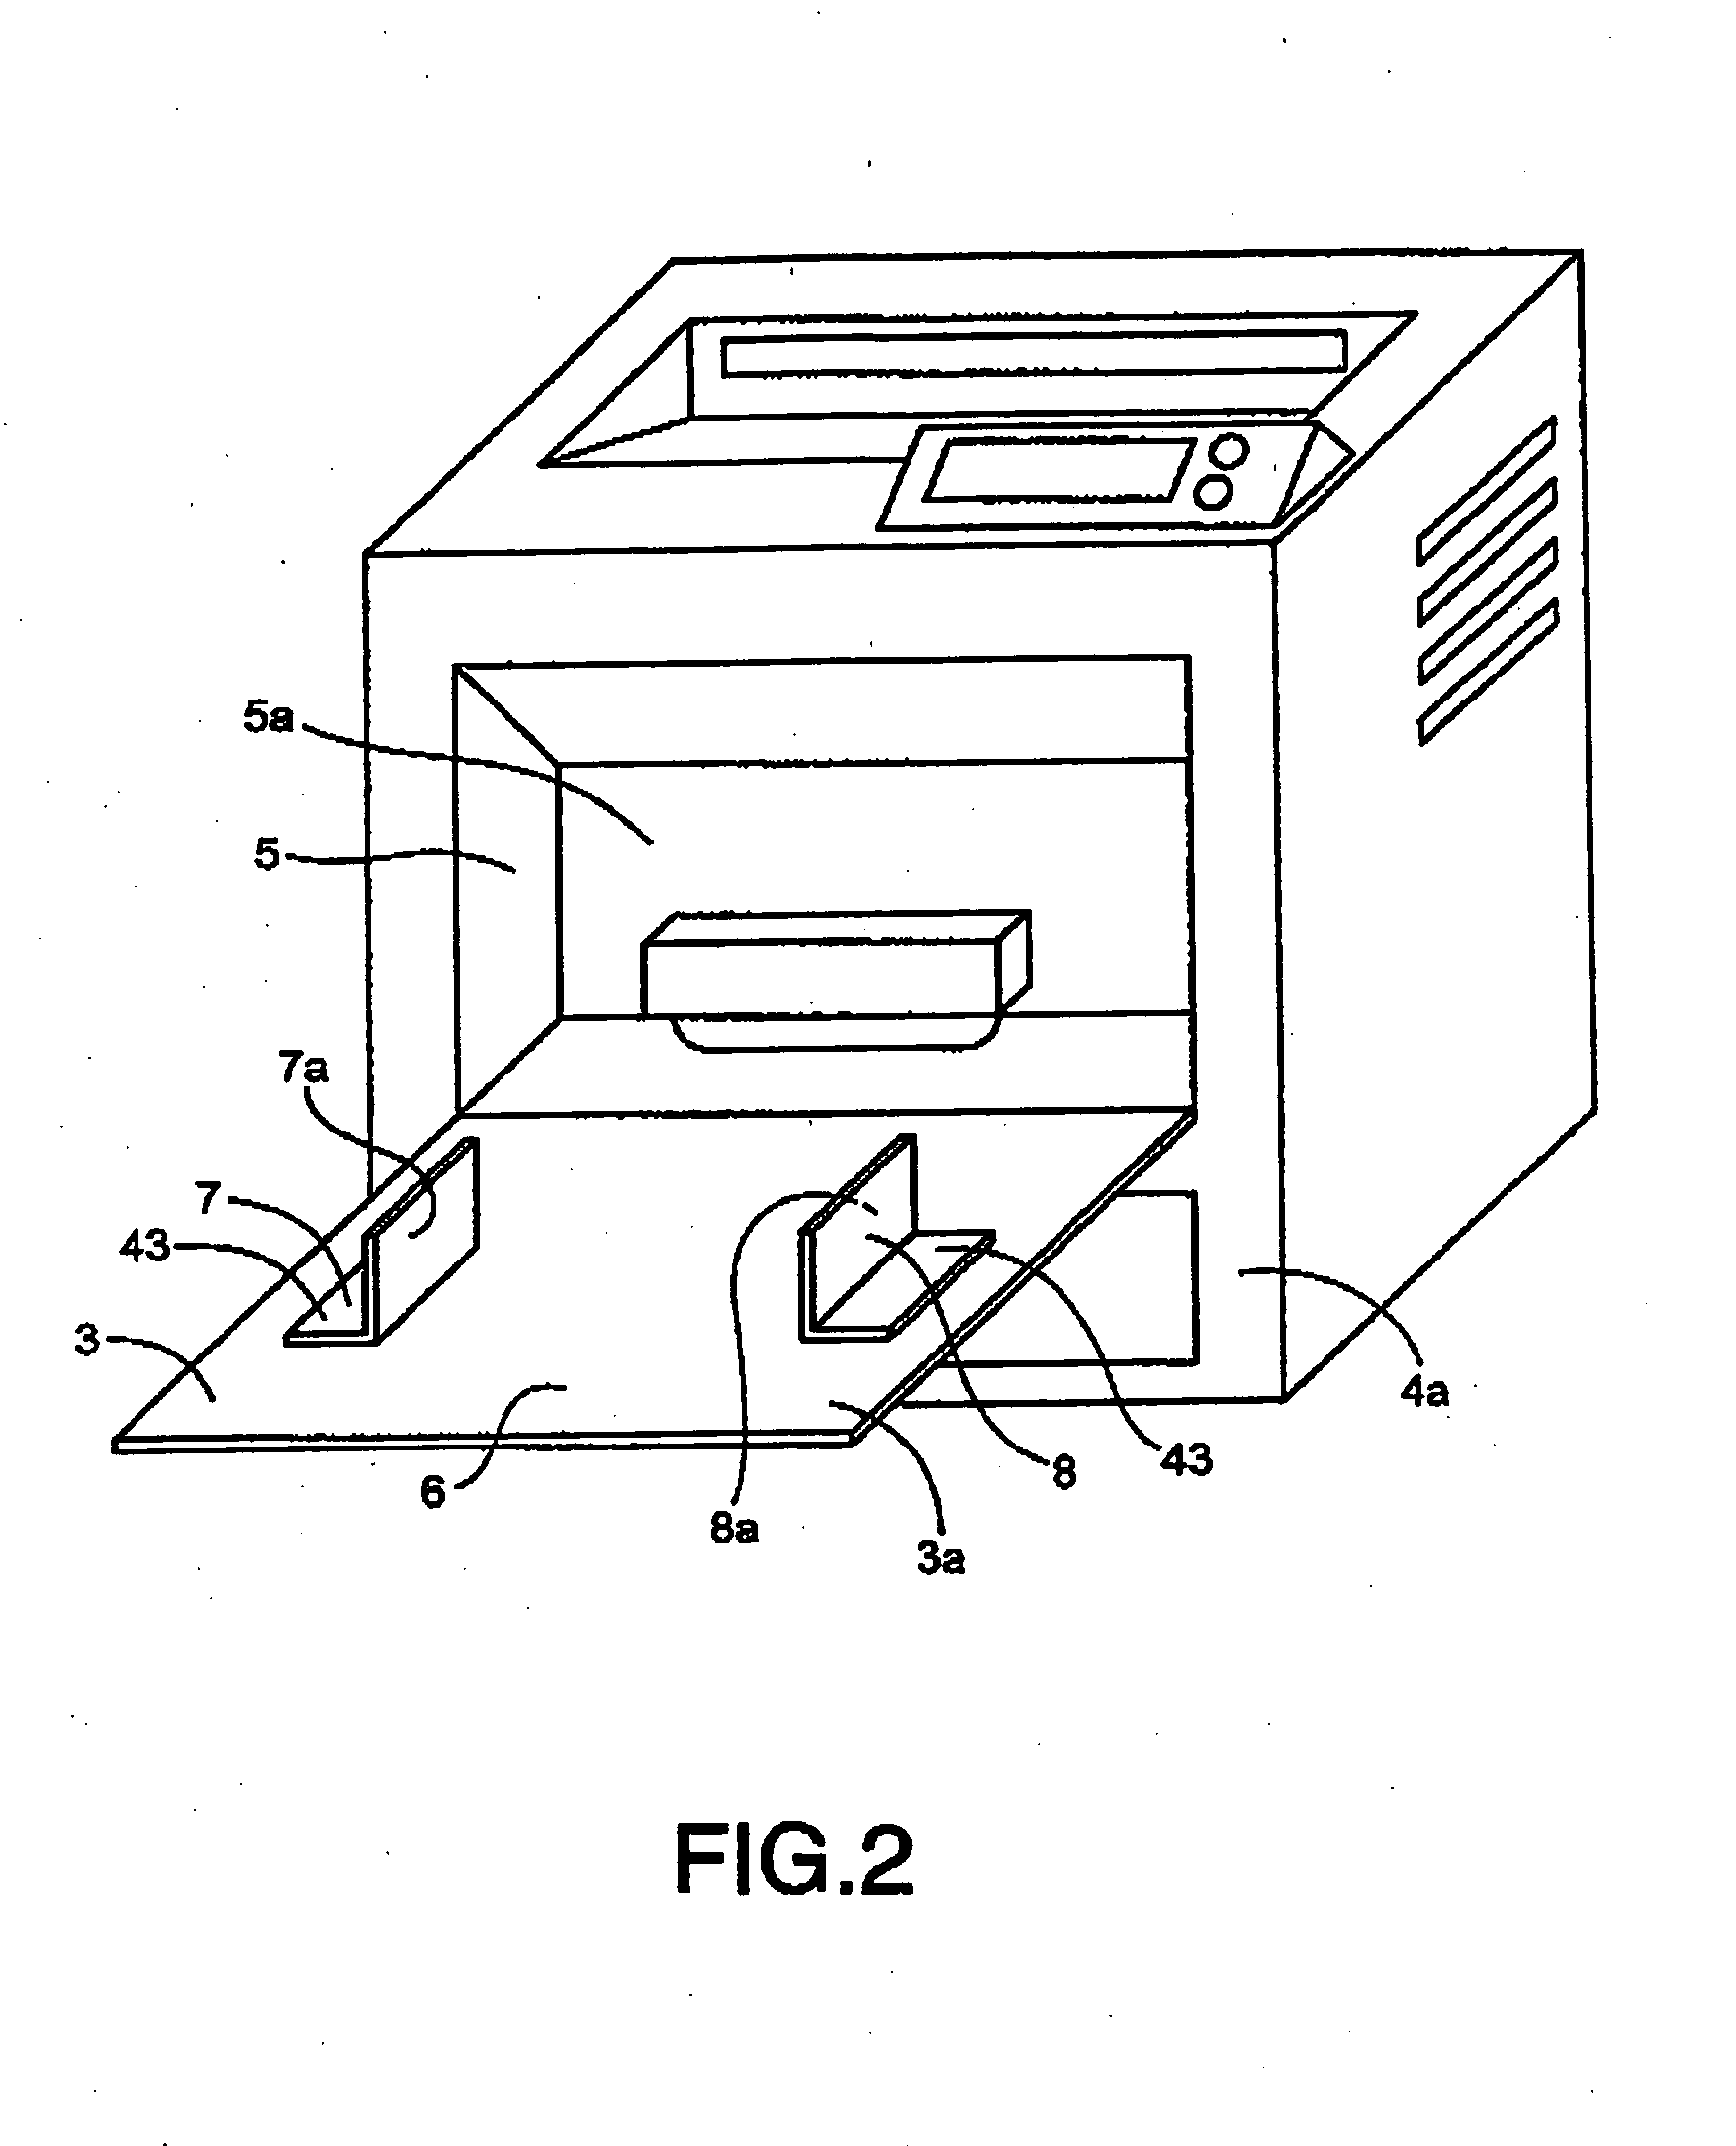 Apparatus for feeding sheet using retractable edge guide for guiding lateral edge of sheet